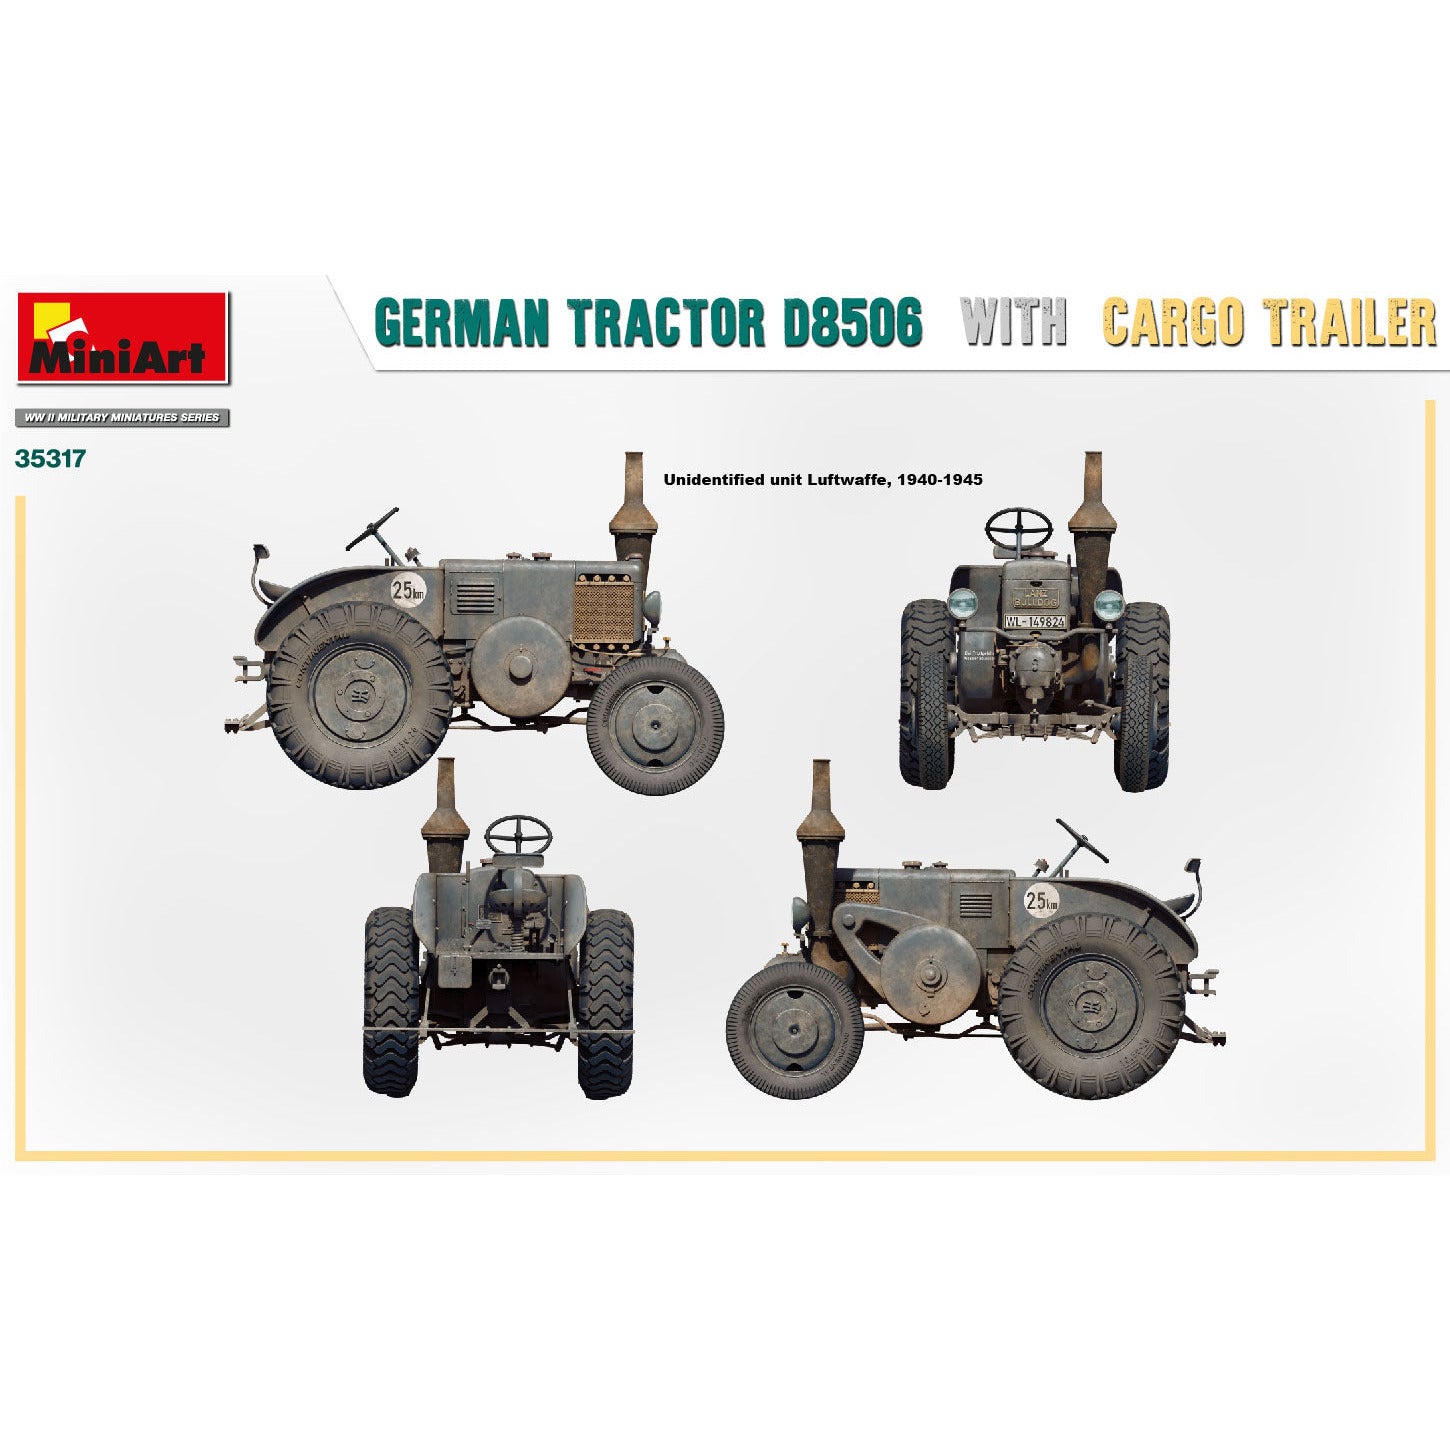 MINIART 1/35 German Tractor D8506 with Cargo Trailer